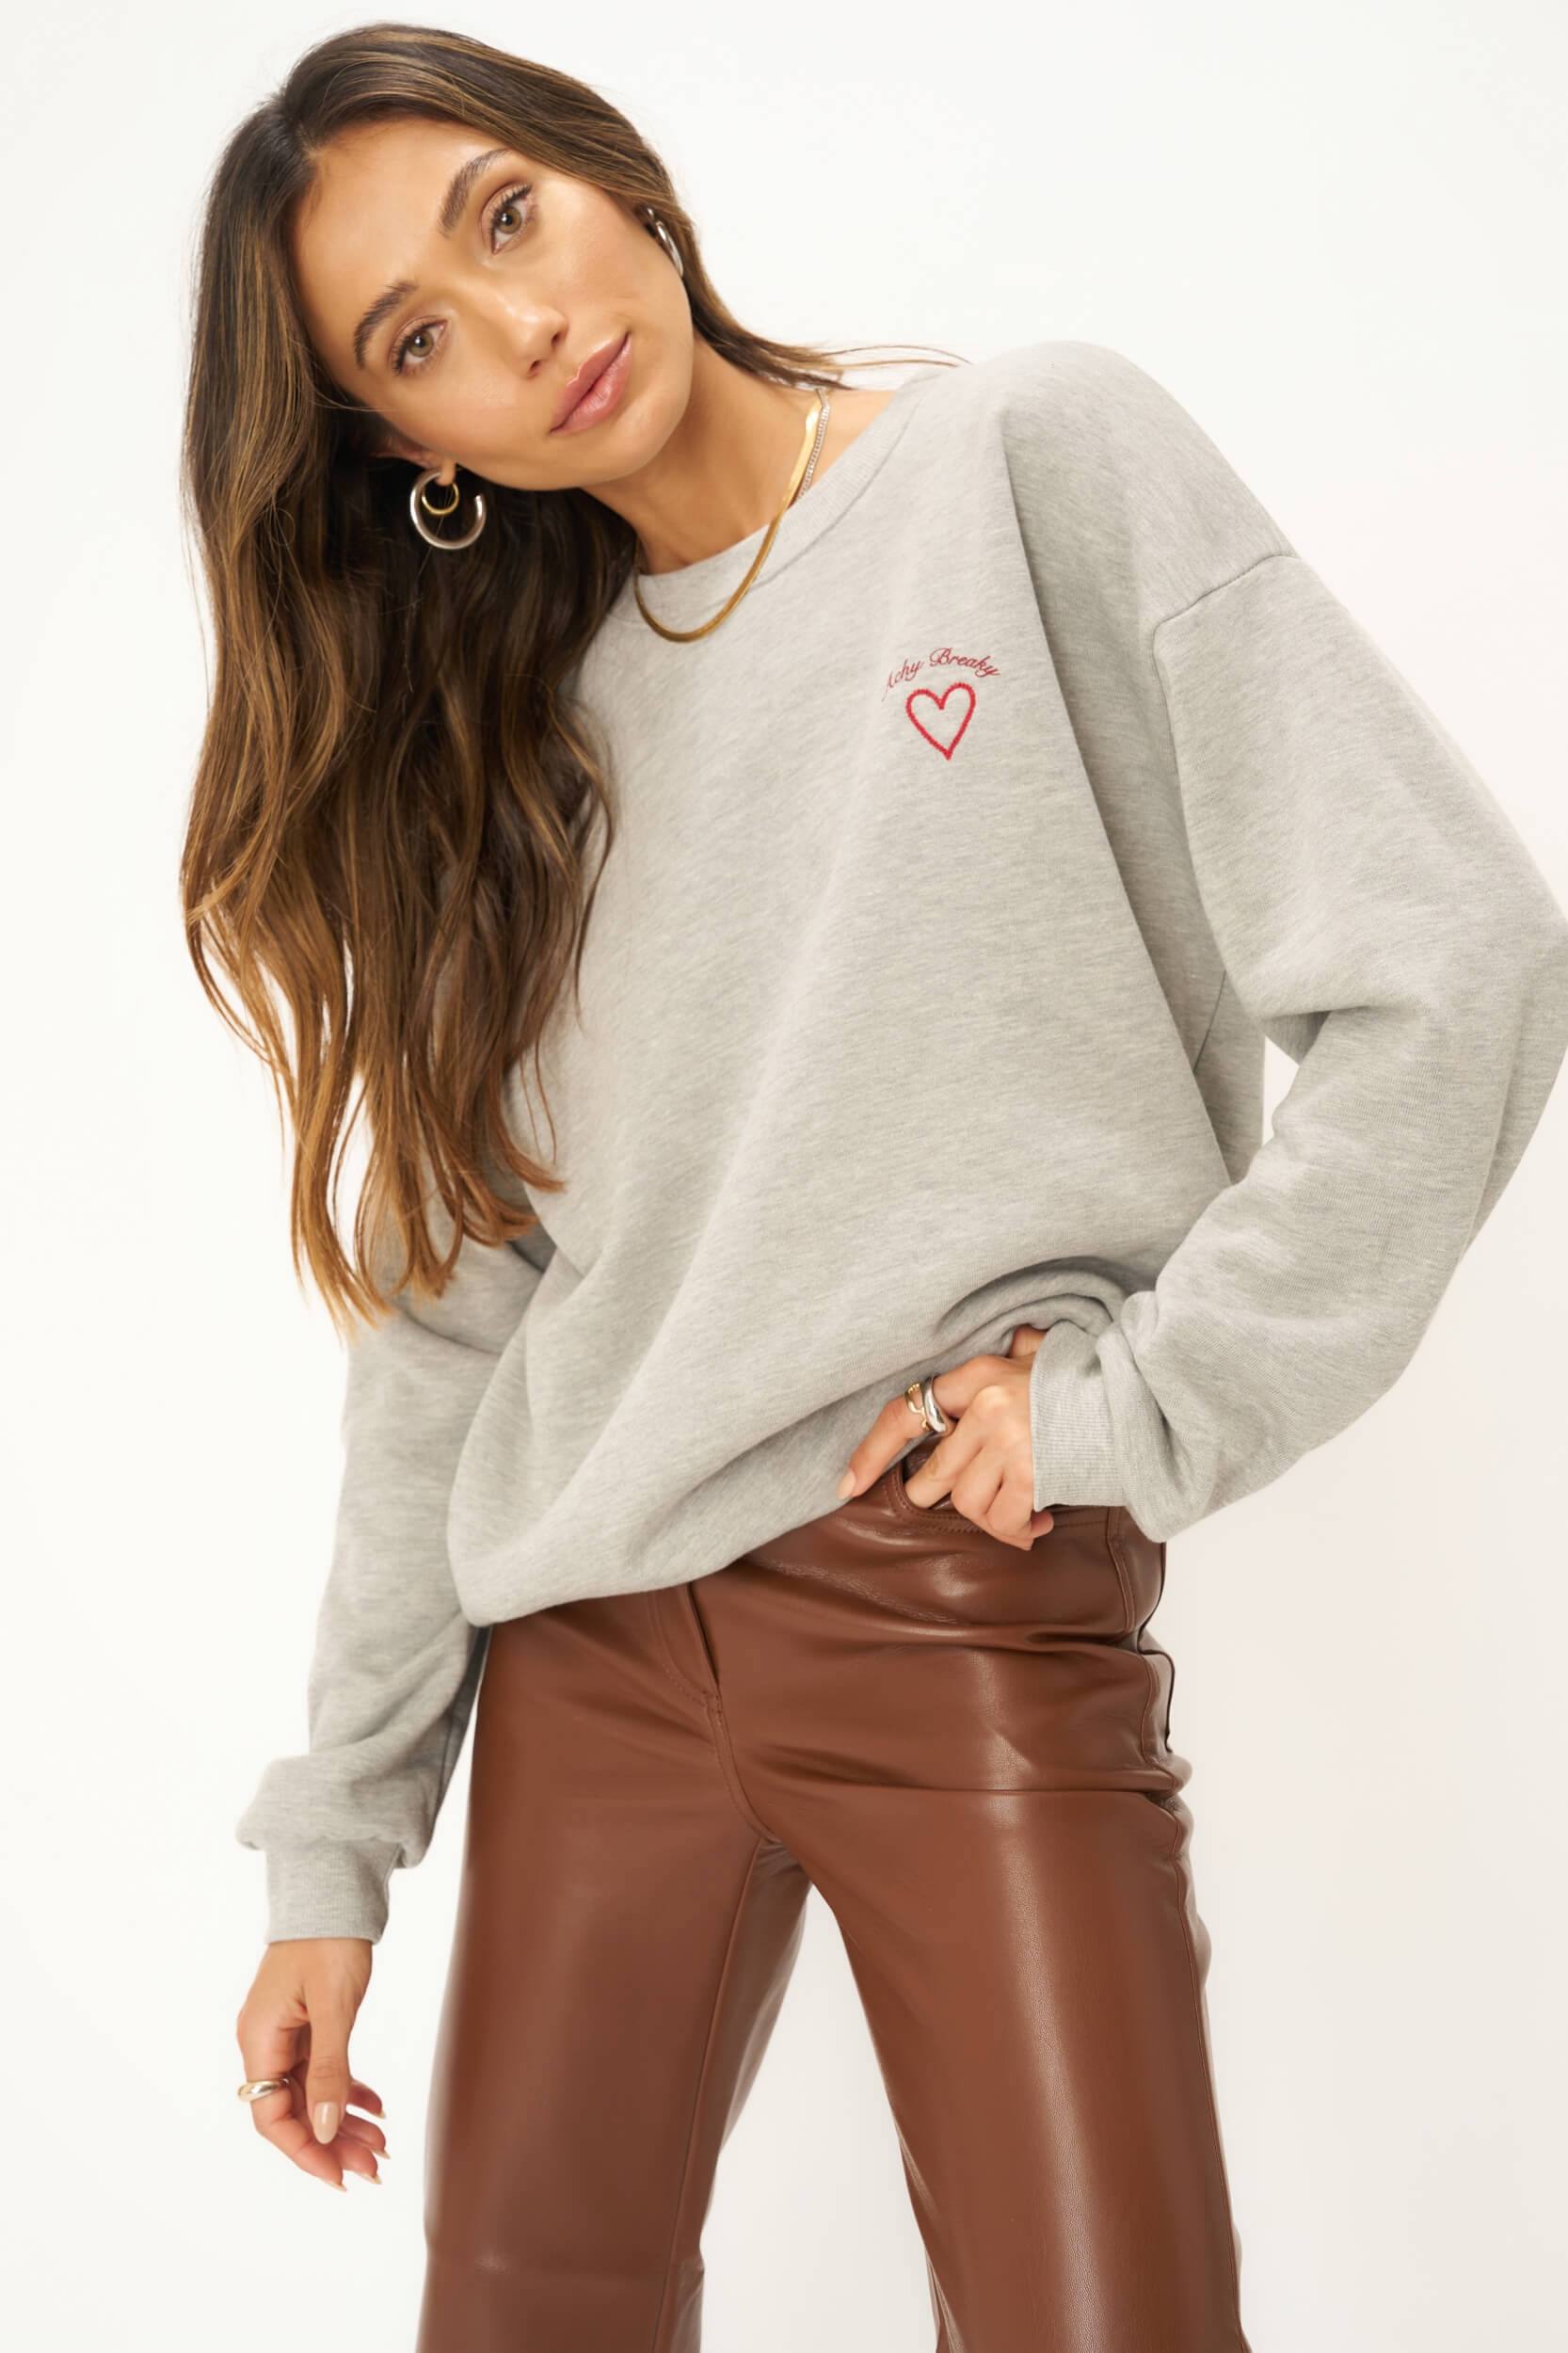 Achy Breaky Embroidered Sweatshirt PROJECT Grey Heather – - T SOCIAL